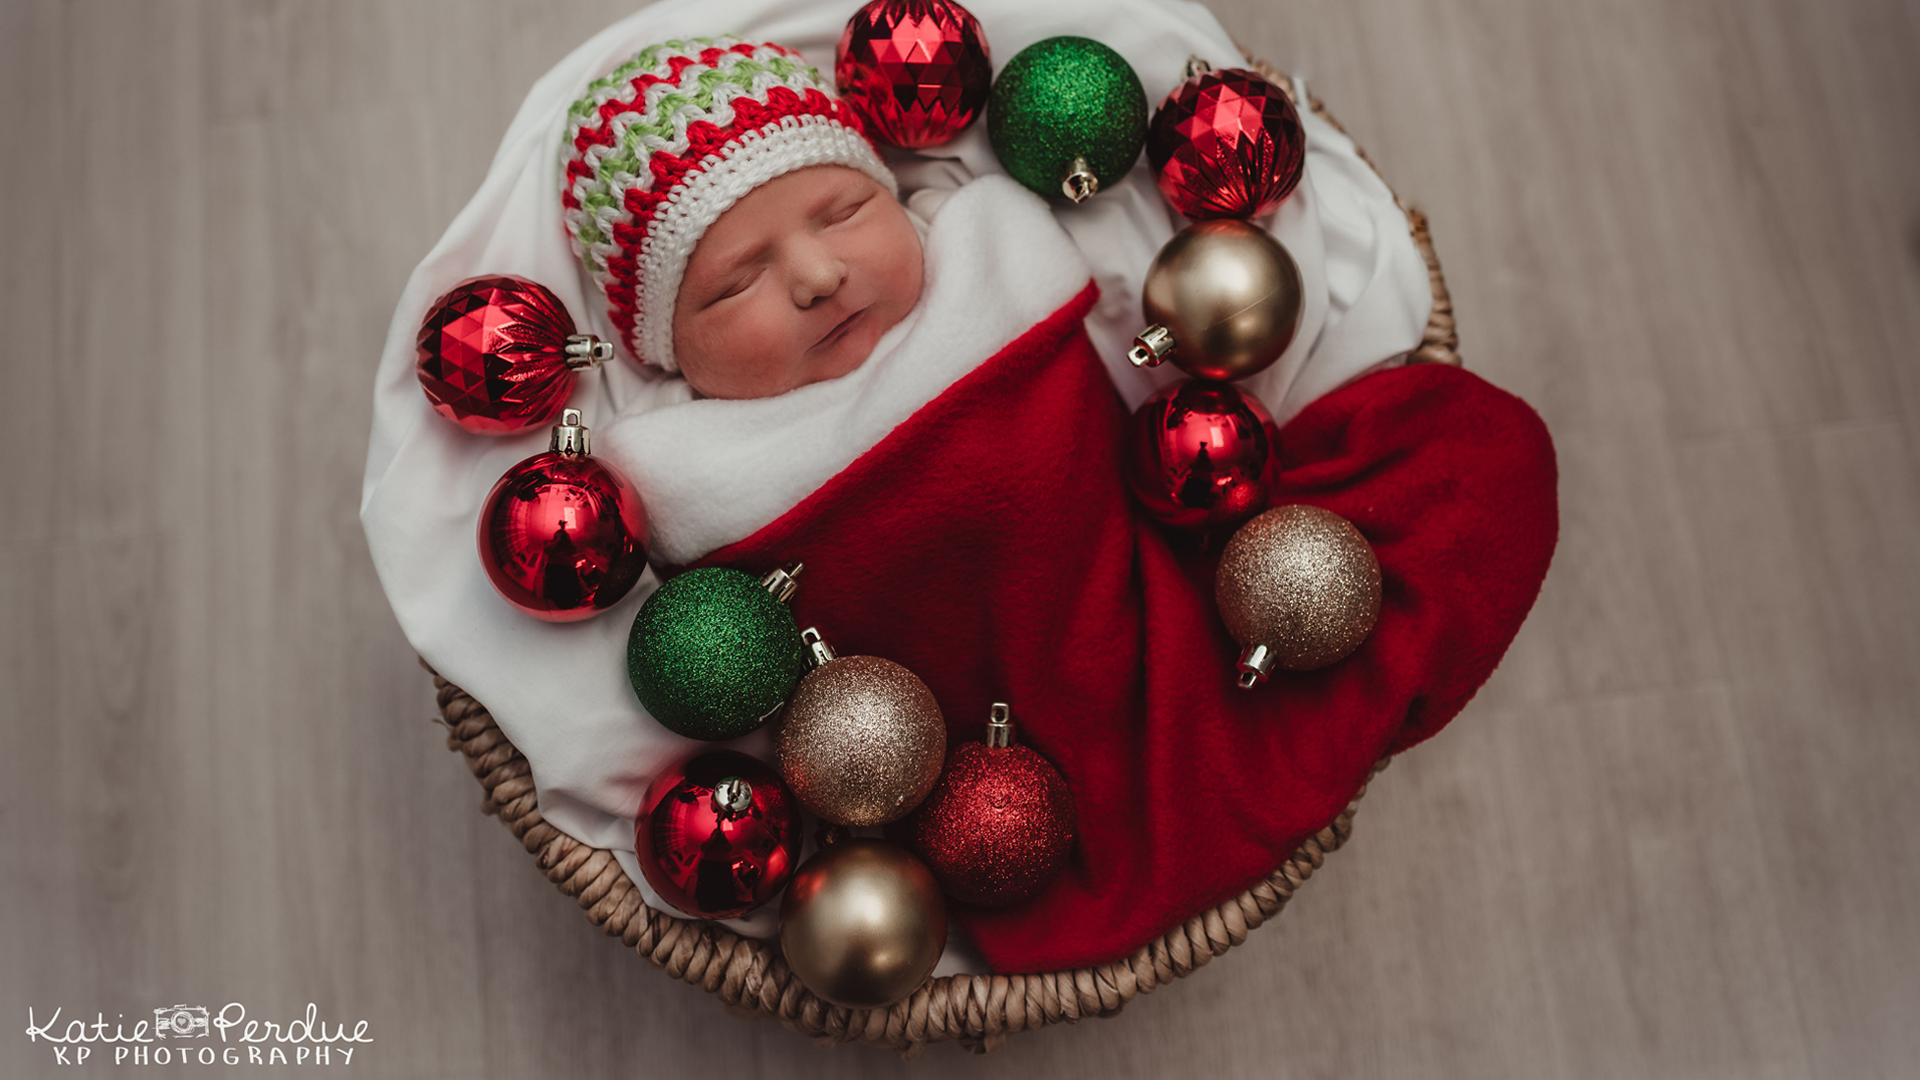 Continuing with a 29-year tradition, new parents at Baptist Health Louisville will have a little something extra in their stockings this Christmas holiday.